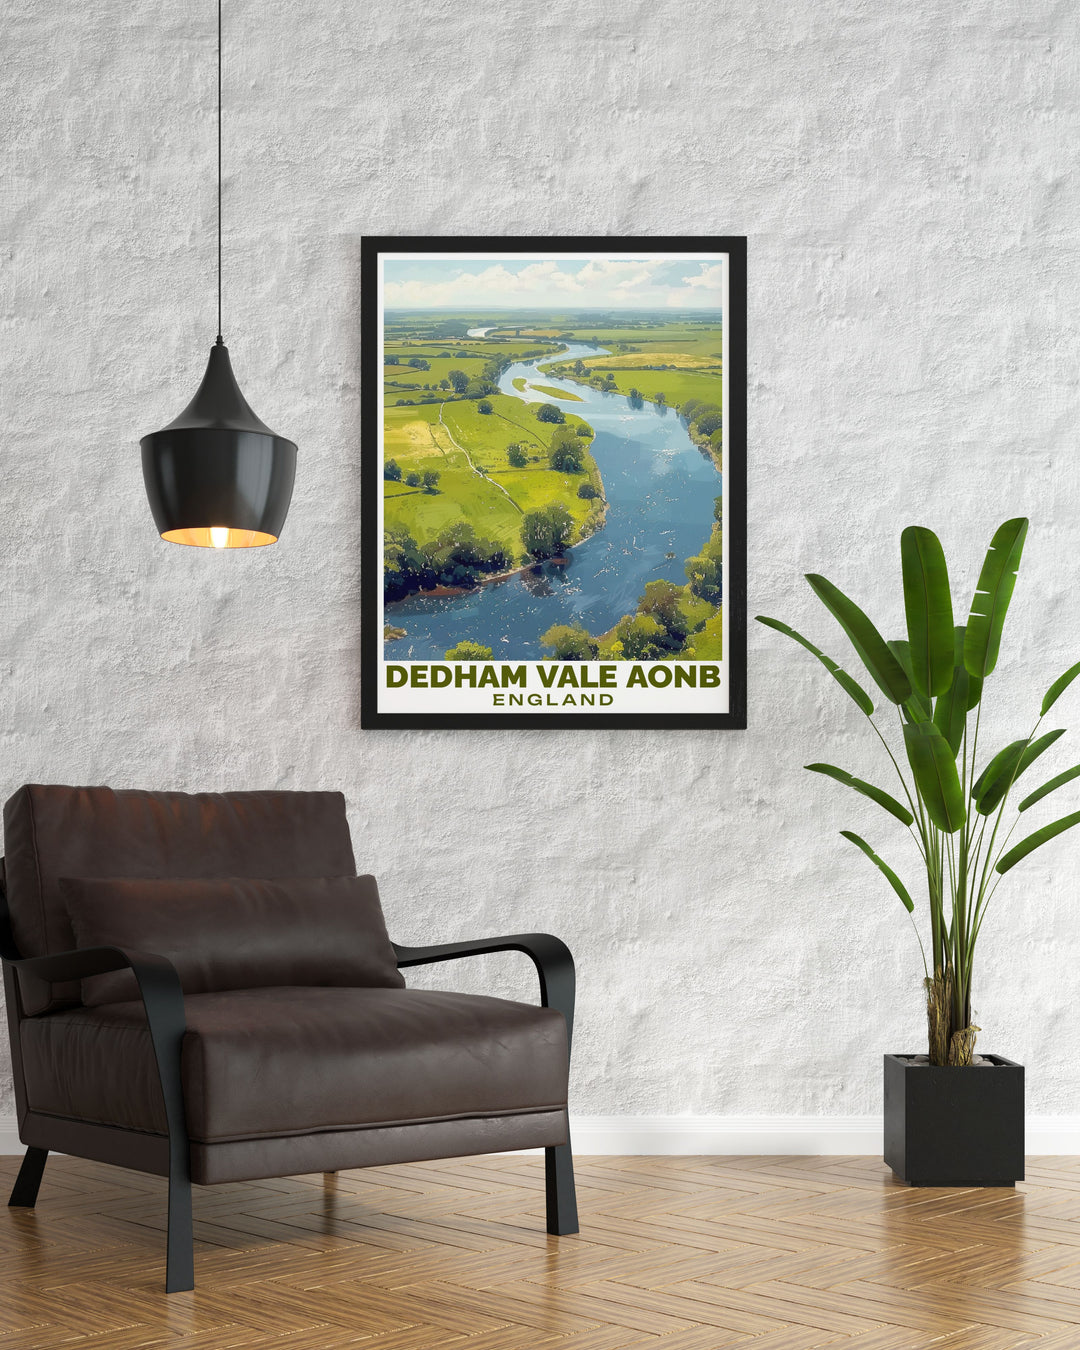 Framed art showcasing the serene views of the Natural Beauty Terrain in Dedham Vale, capturing the natural splendor and cultural significance of this iconic region.